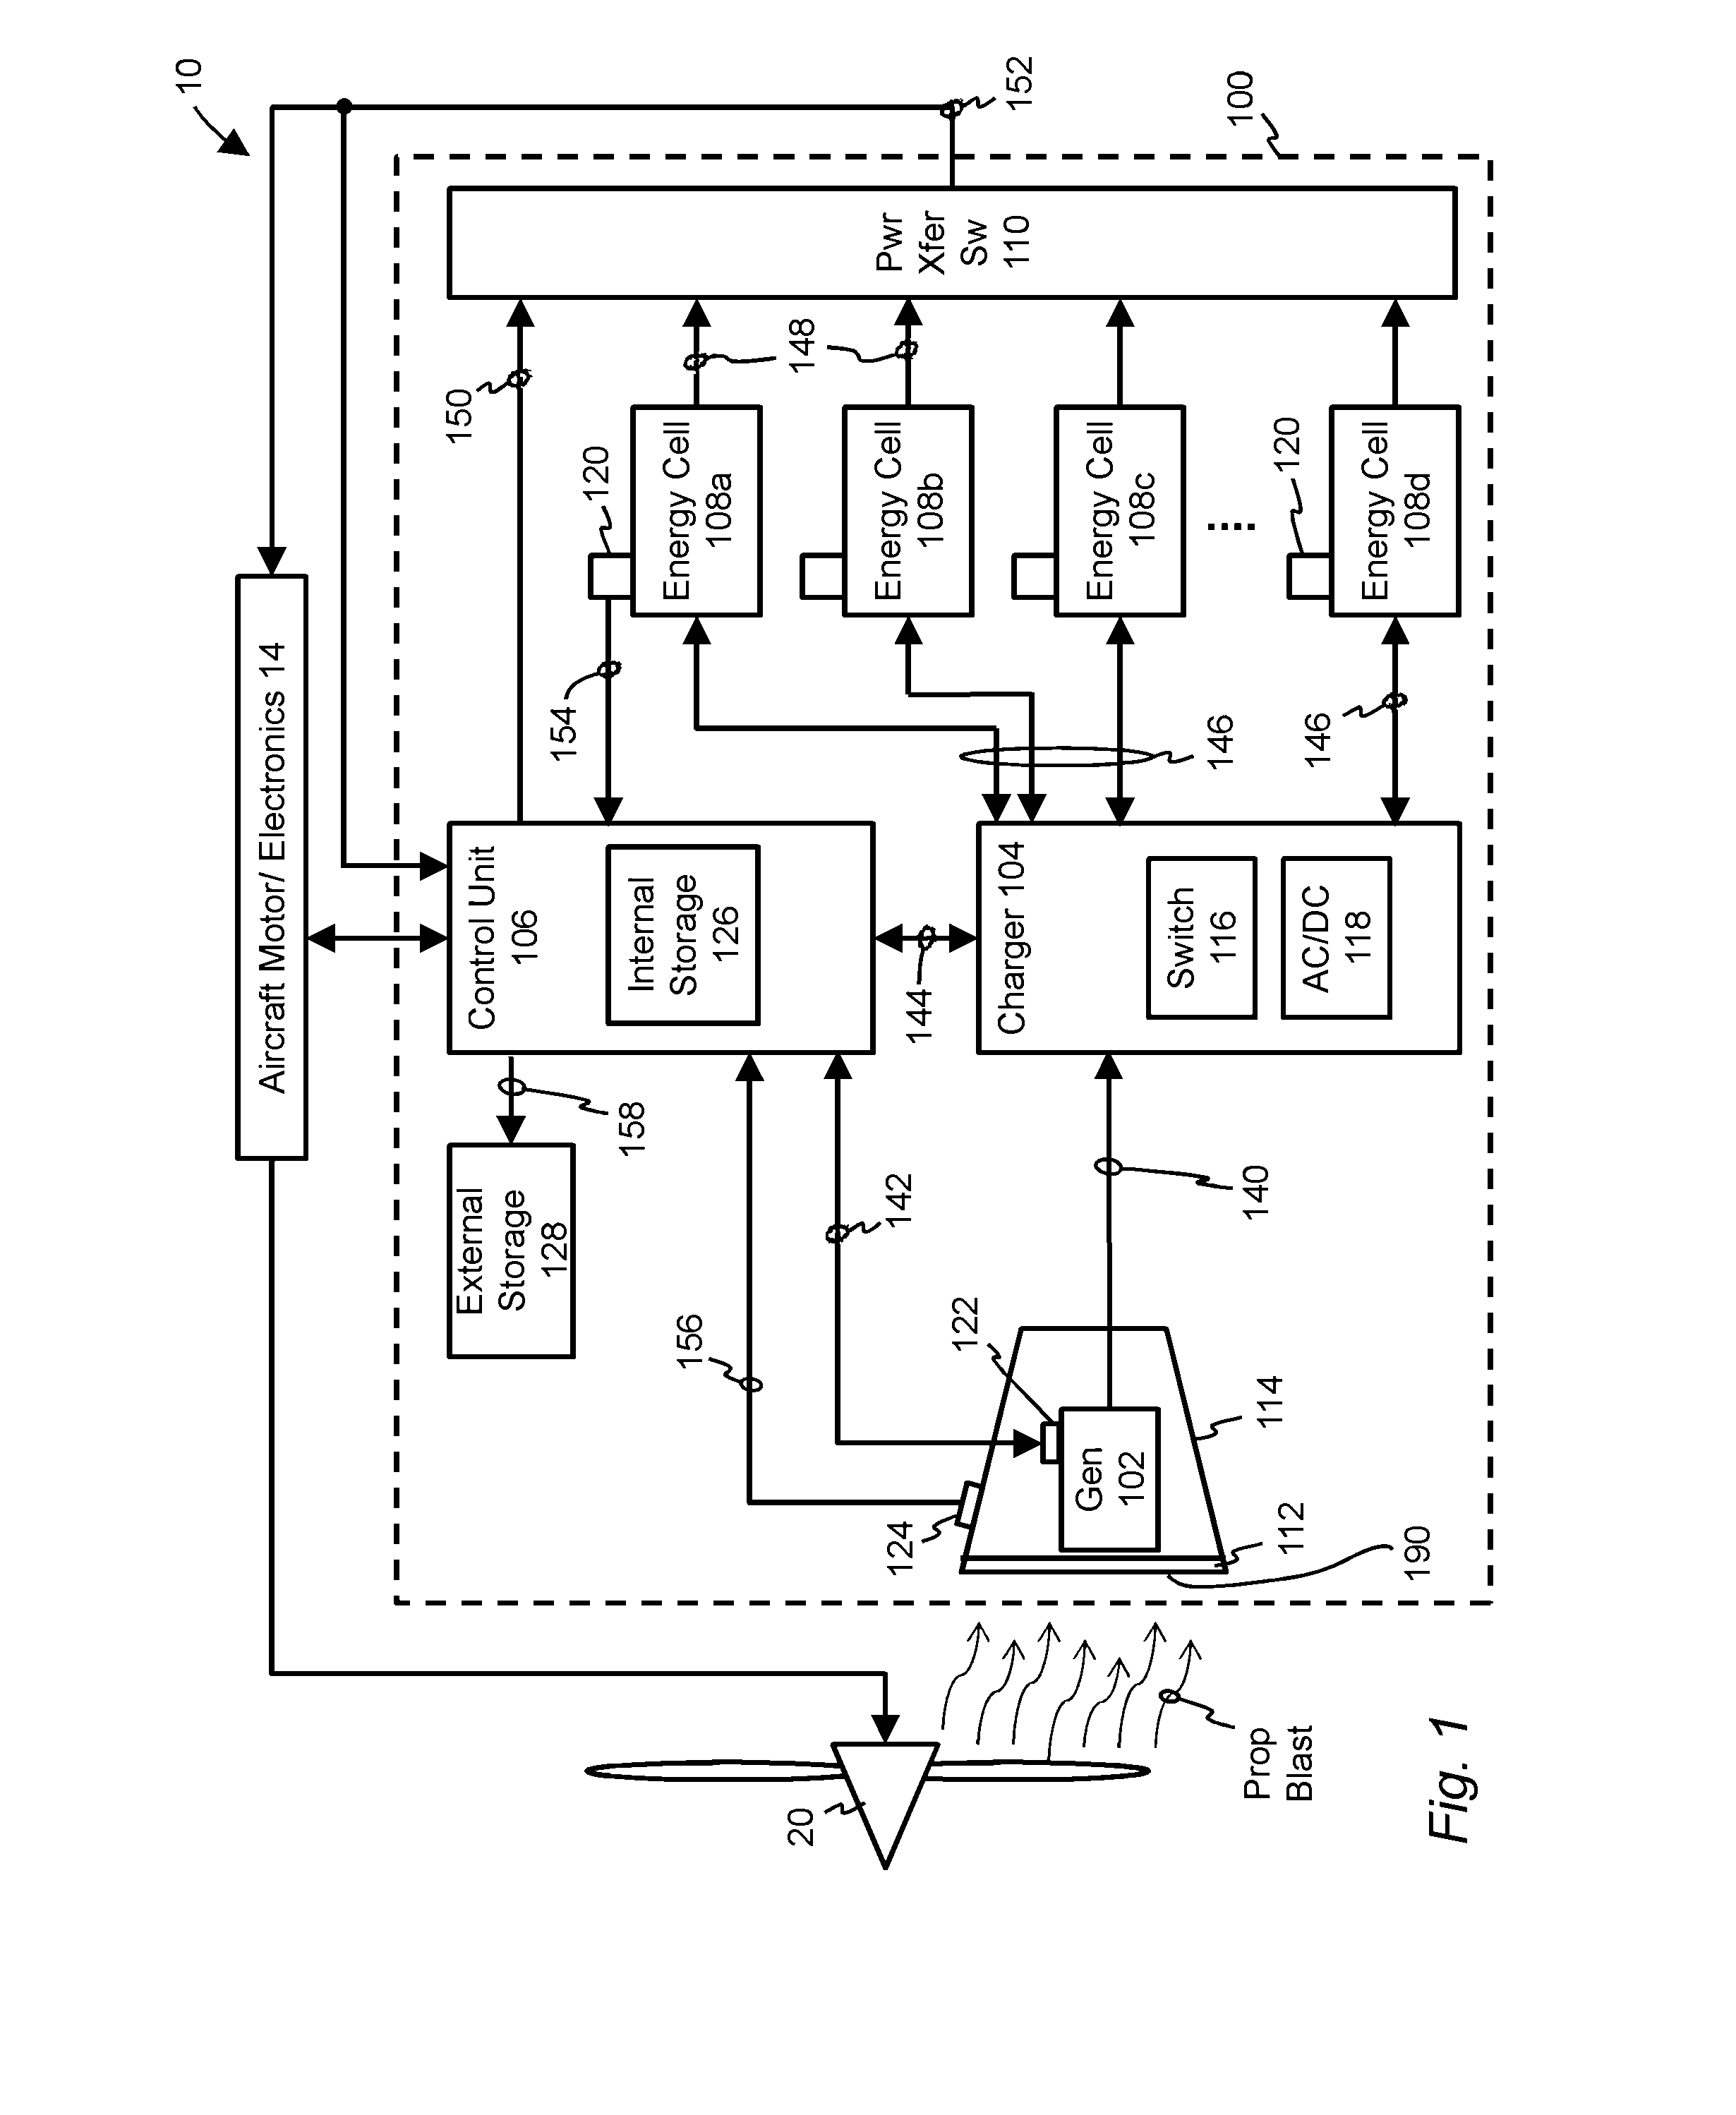 Energy Cell Regenerative System For Electrically Powered Aircraft